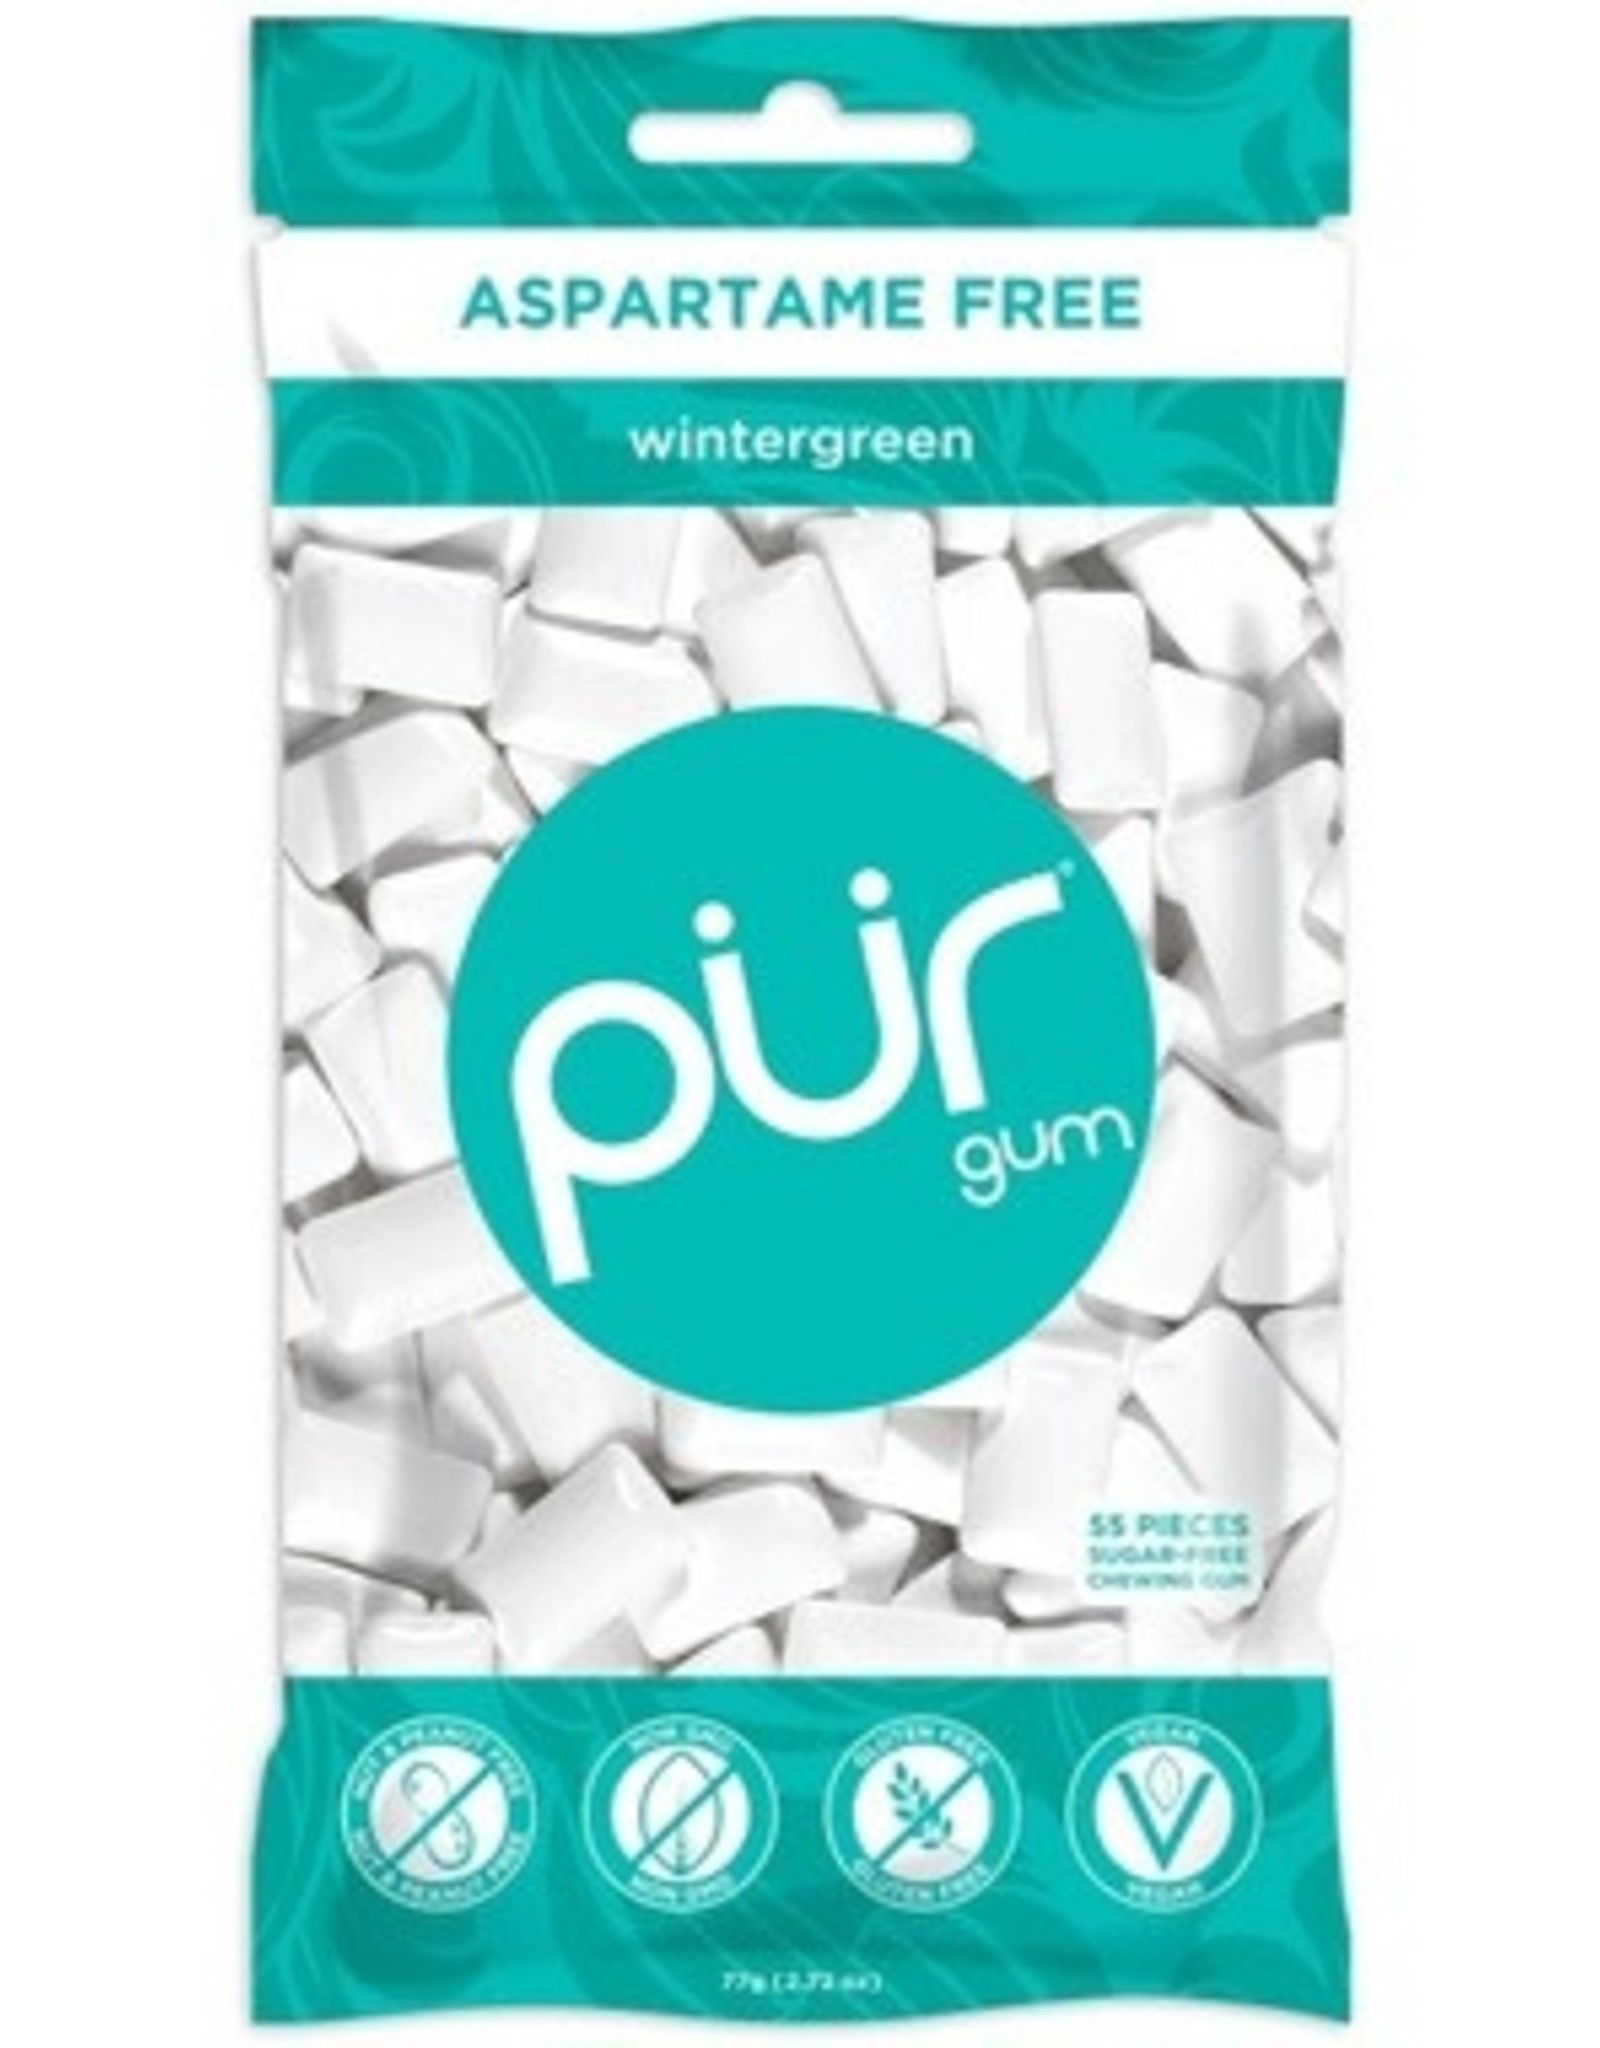 The PUR Comapny Pur Gum Wintergreen Bag